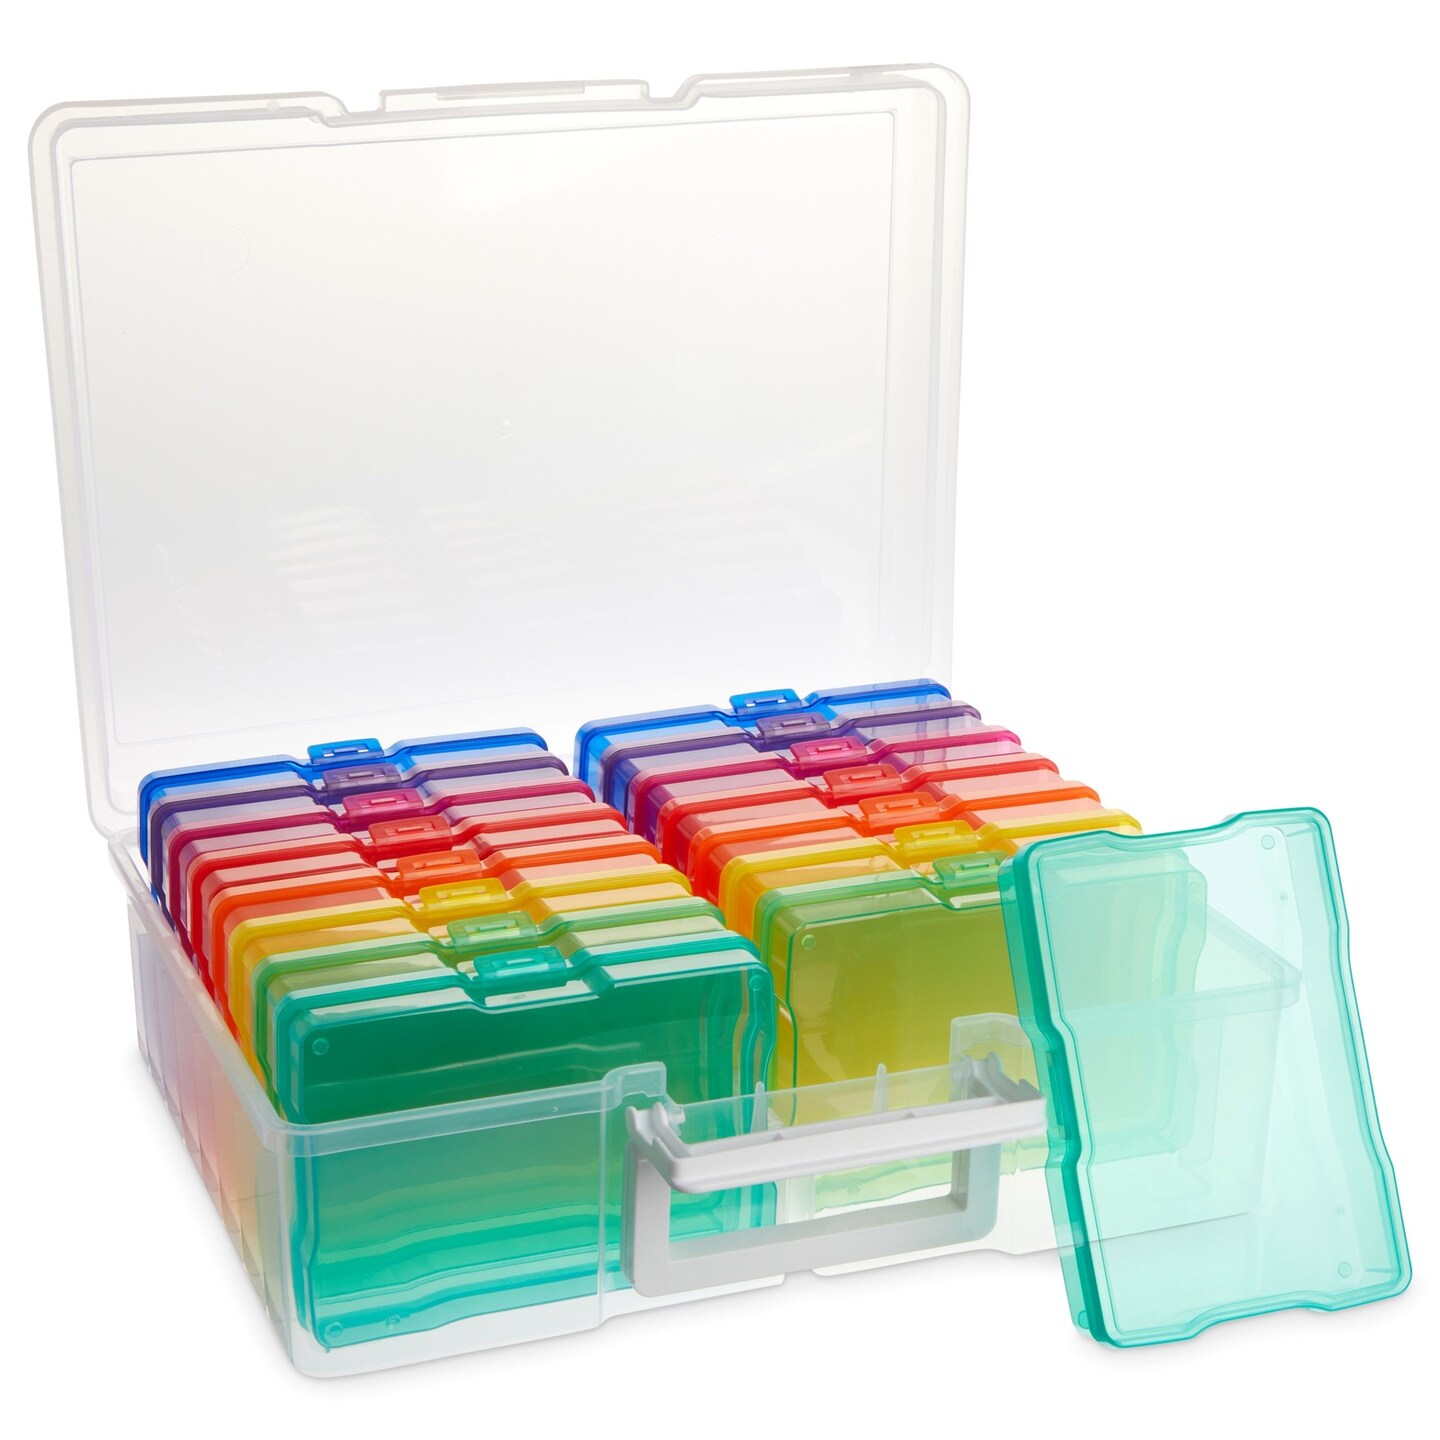 16 Transparent 4x6 Photo Storage Boxes and Organizer with Handle for  Pictures, Art Supplies (Rainbow Colors) Michaels